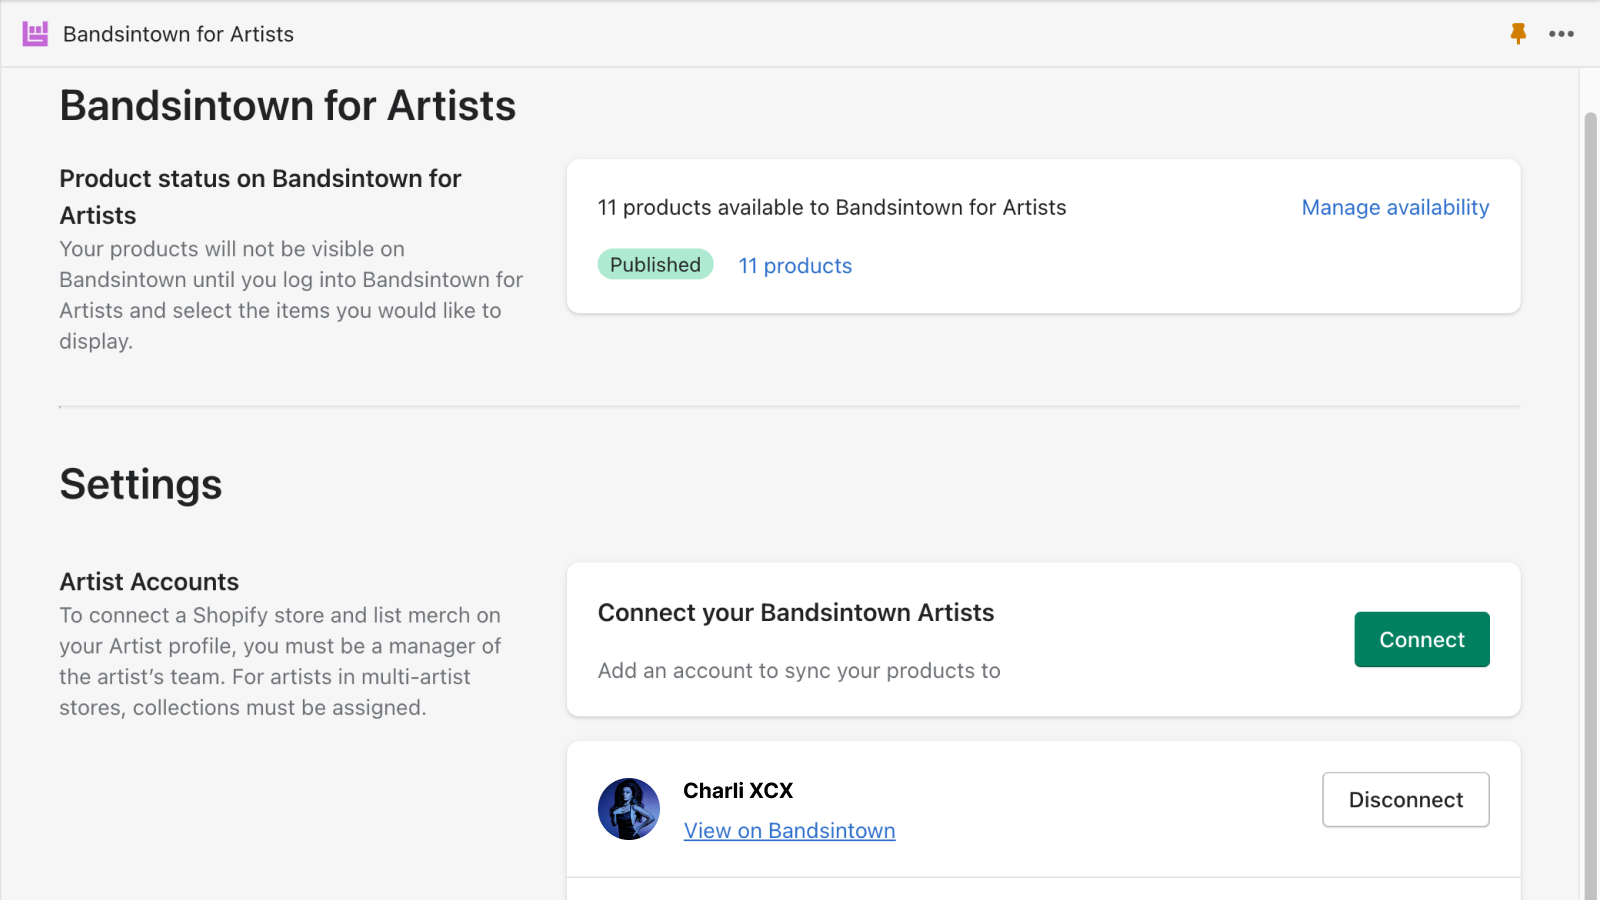 Bandsintown for Artists Overview